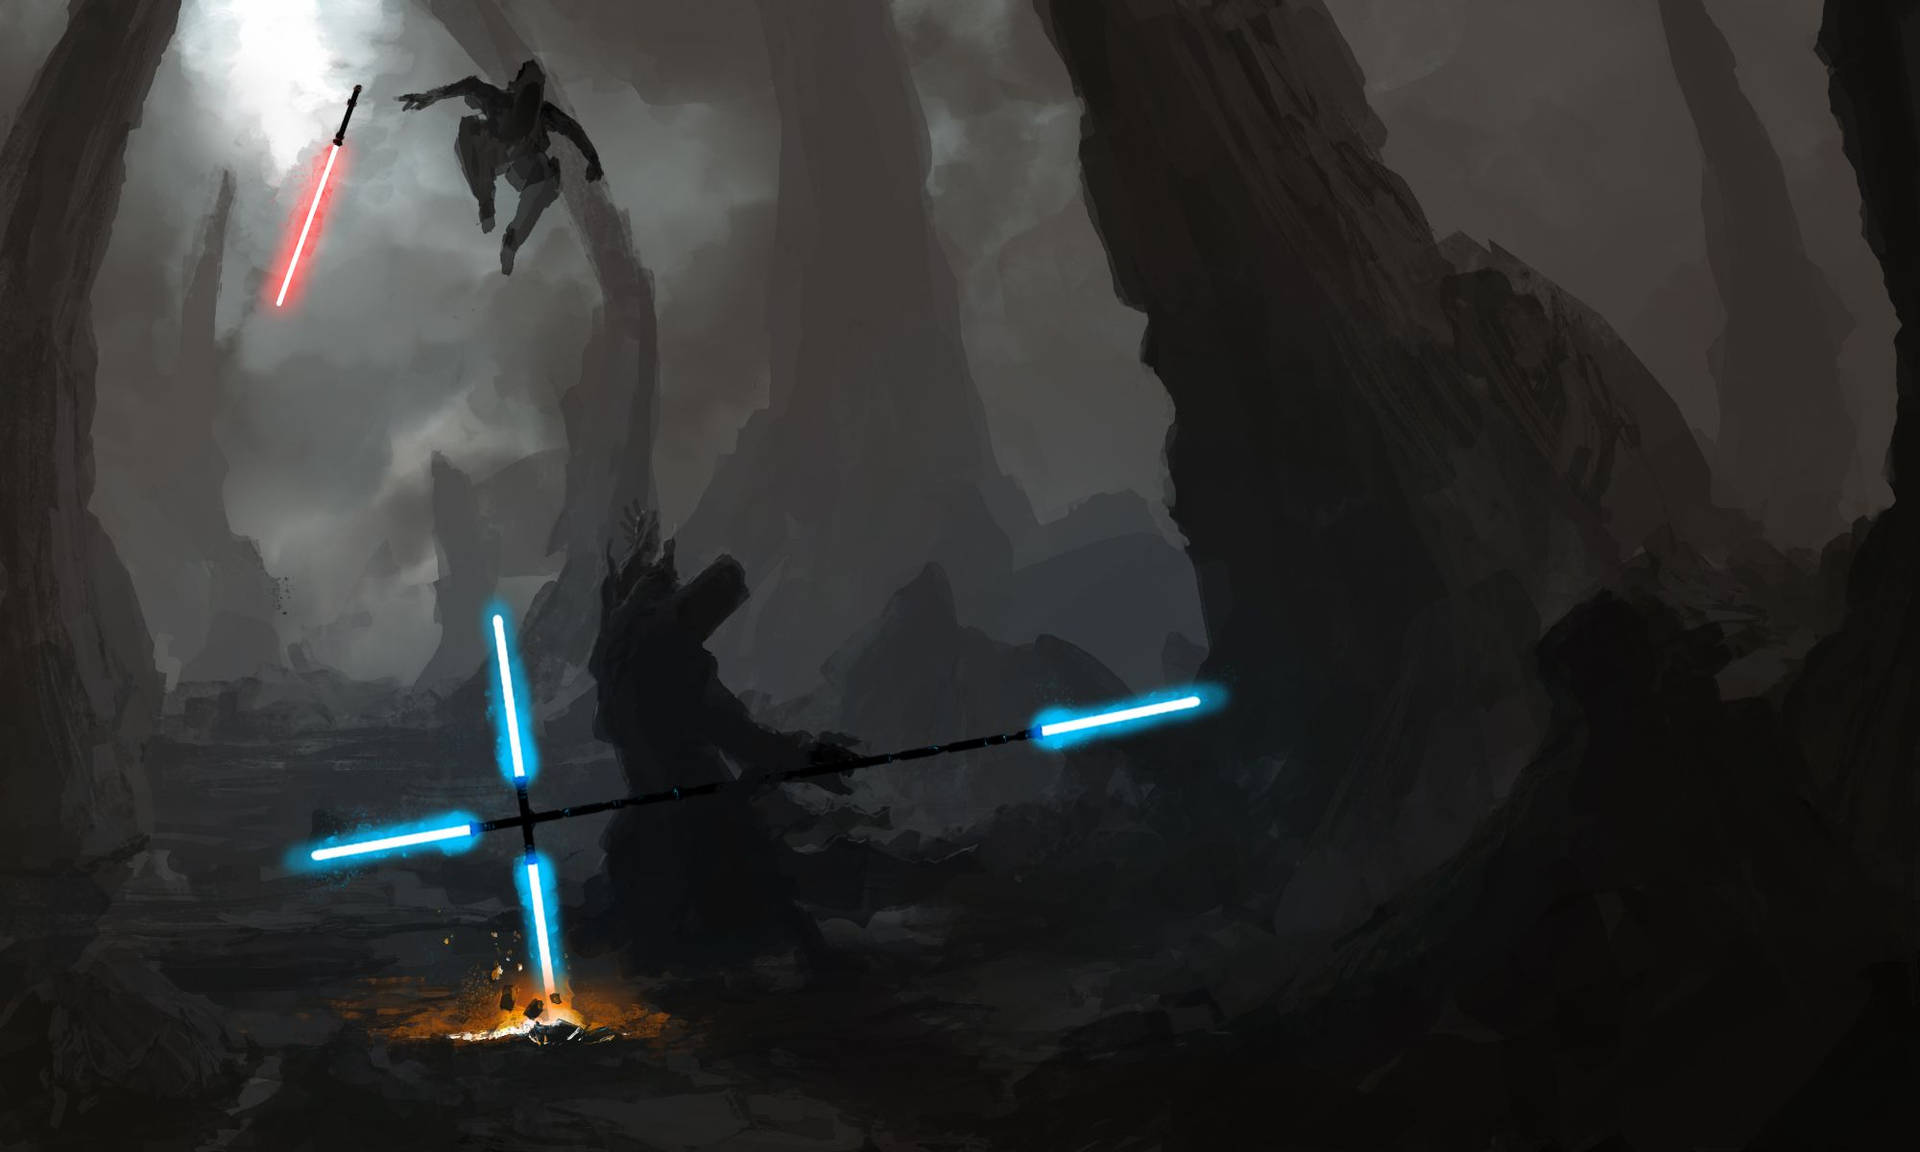 An epic battle between Sith and Jedi Wallpaper